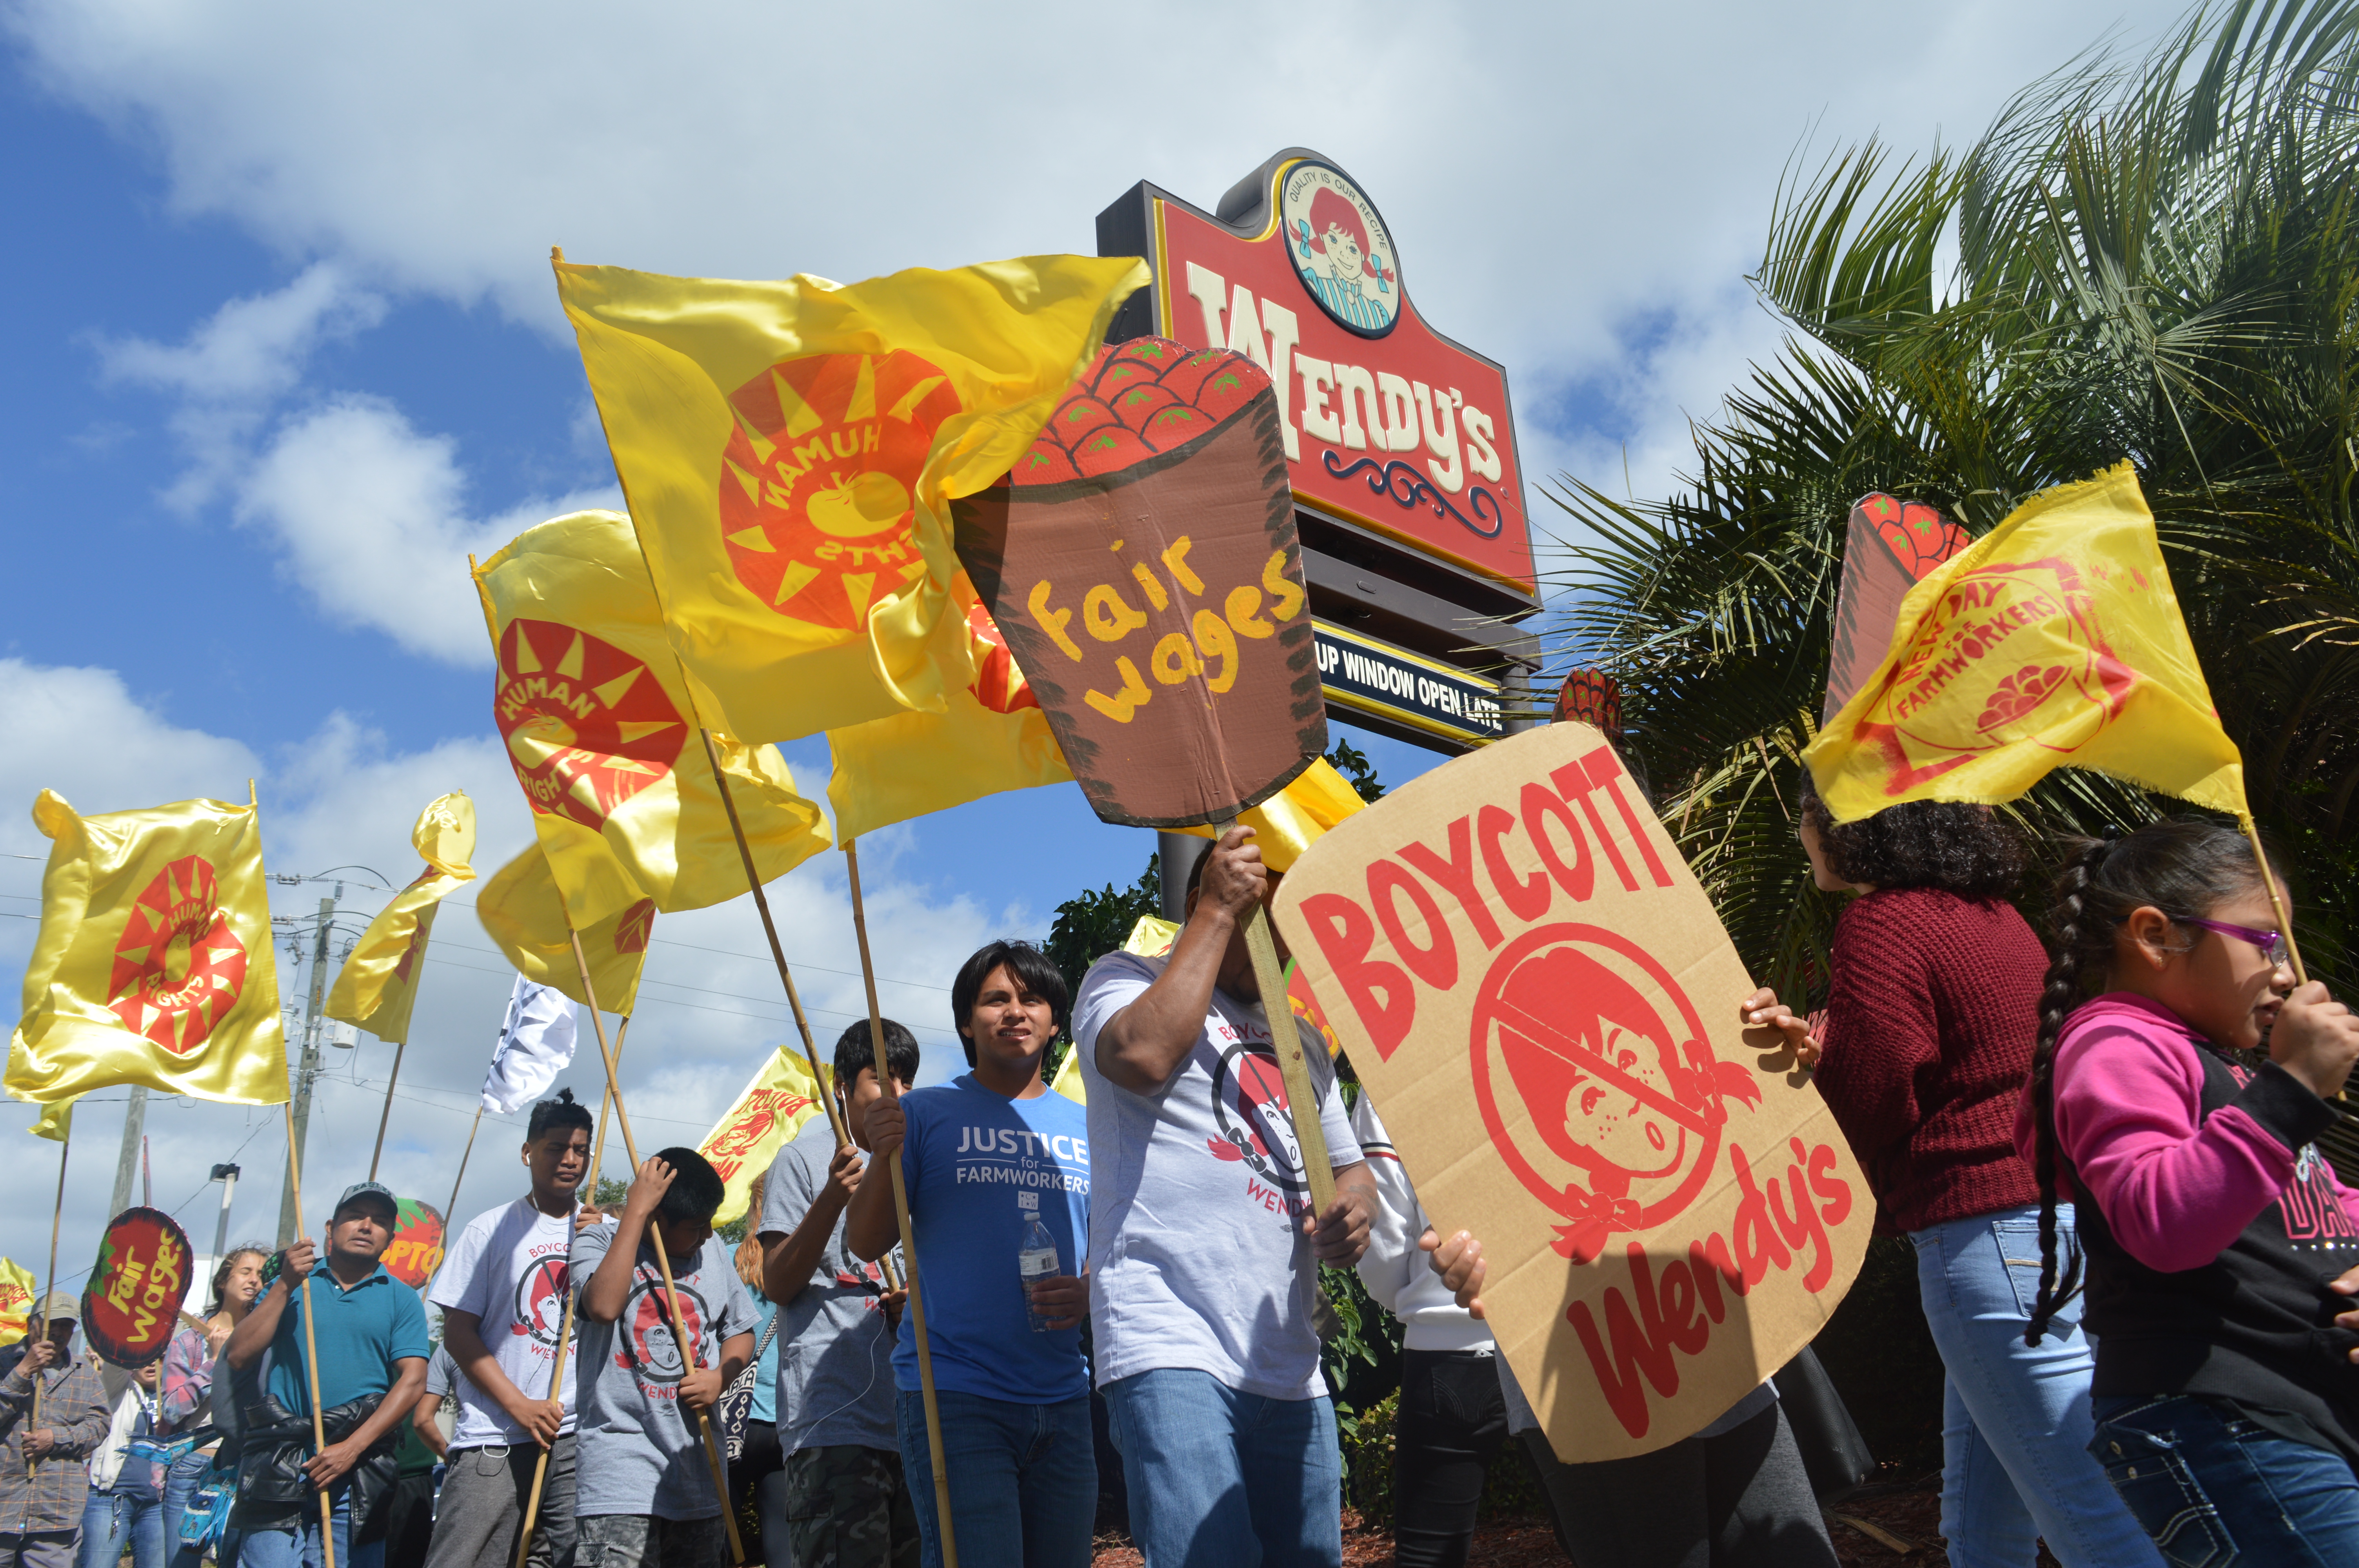 Boycott Wendy’s! Local protest highlights abuse of farmworker women